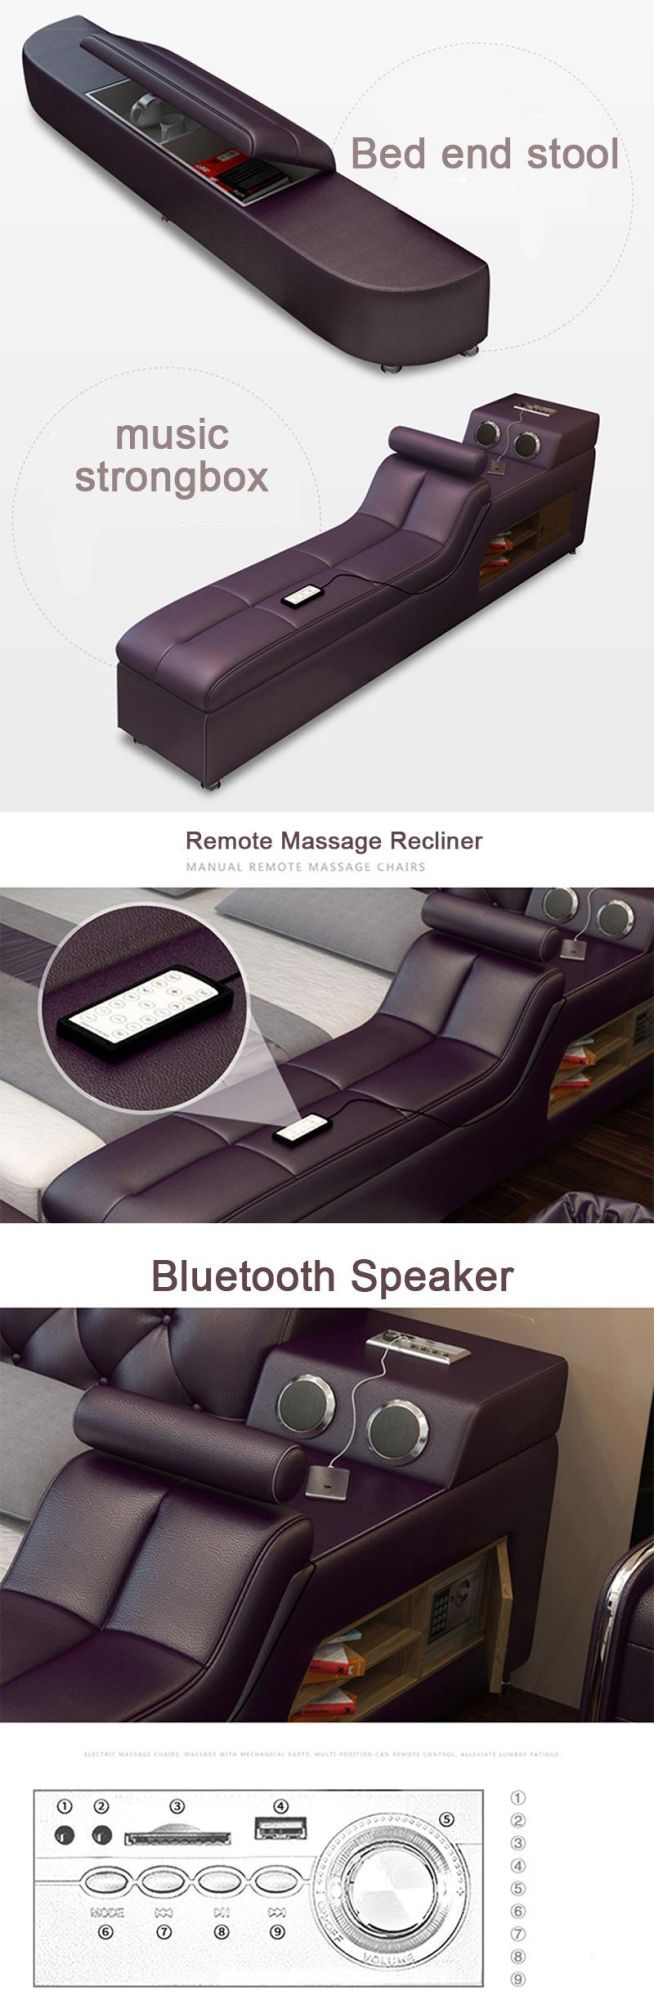 Home Bedroom Furniture Bluetooth Massage Bed Combination Leather King Bed